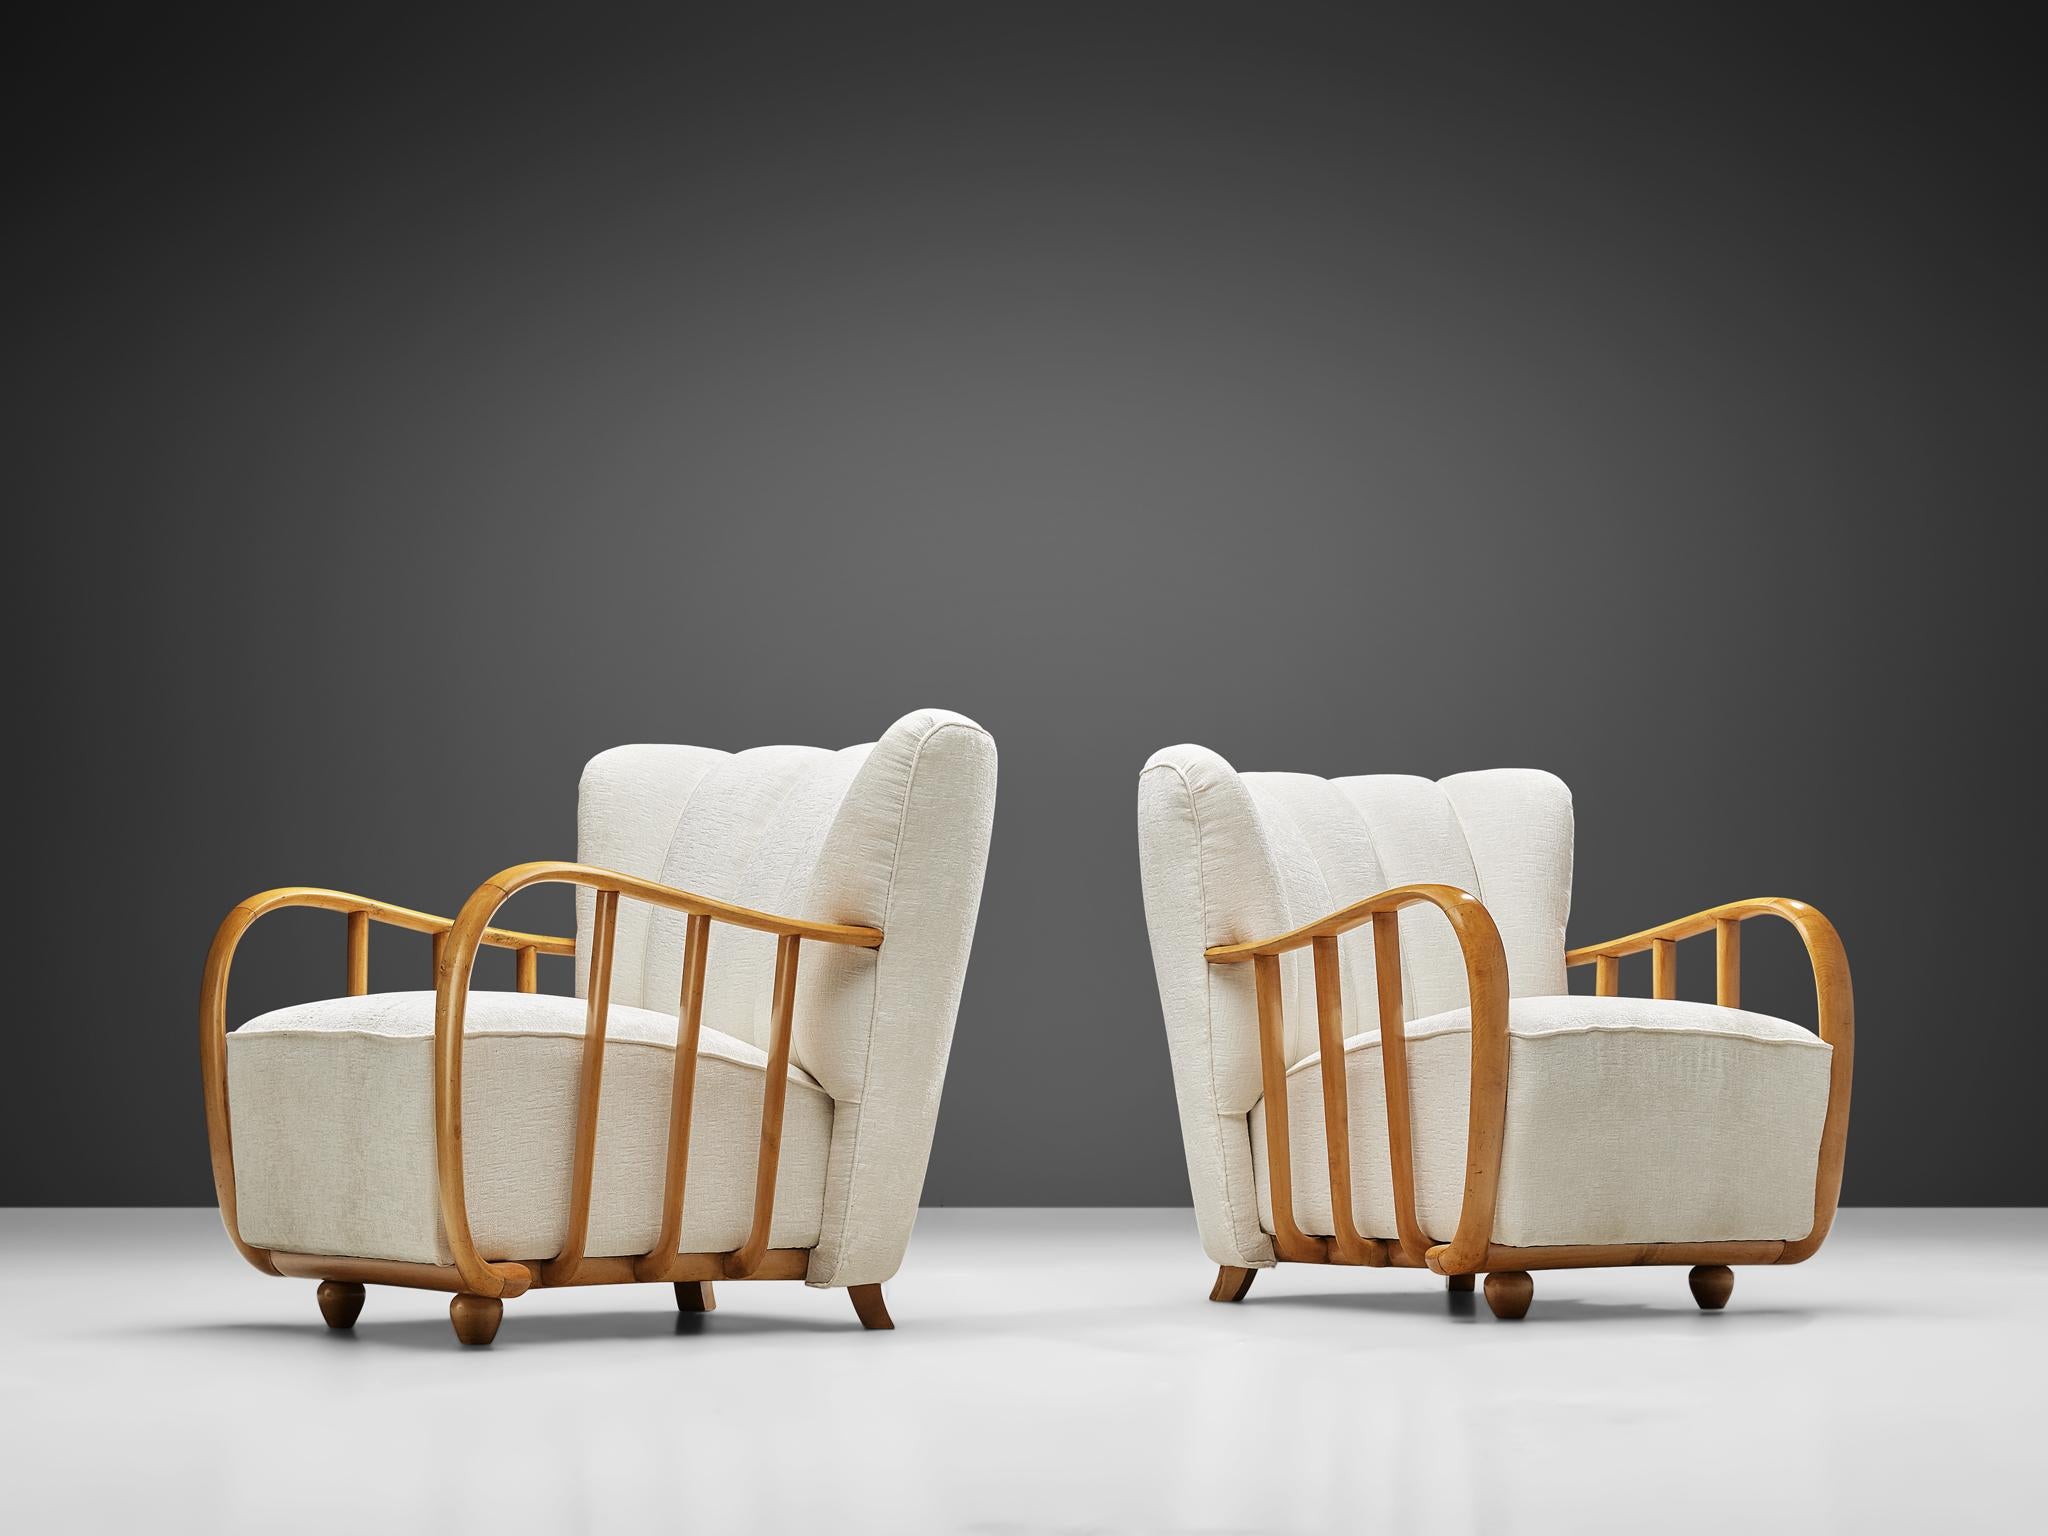 Pair of easy chairs, beech, white textured upholstery, Italy, 1940s.
 
Set of Italian armchairs in late Art Deco style of the 1940s. The most distinctive feature of these easy chairs are the beech armrests elegantly curved around the seating. The